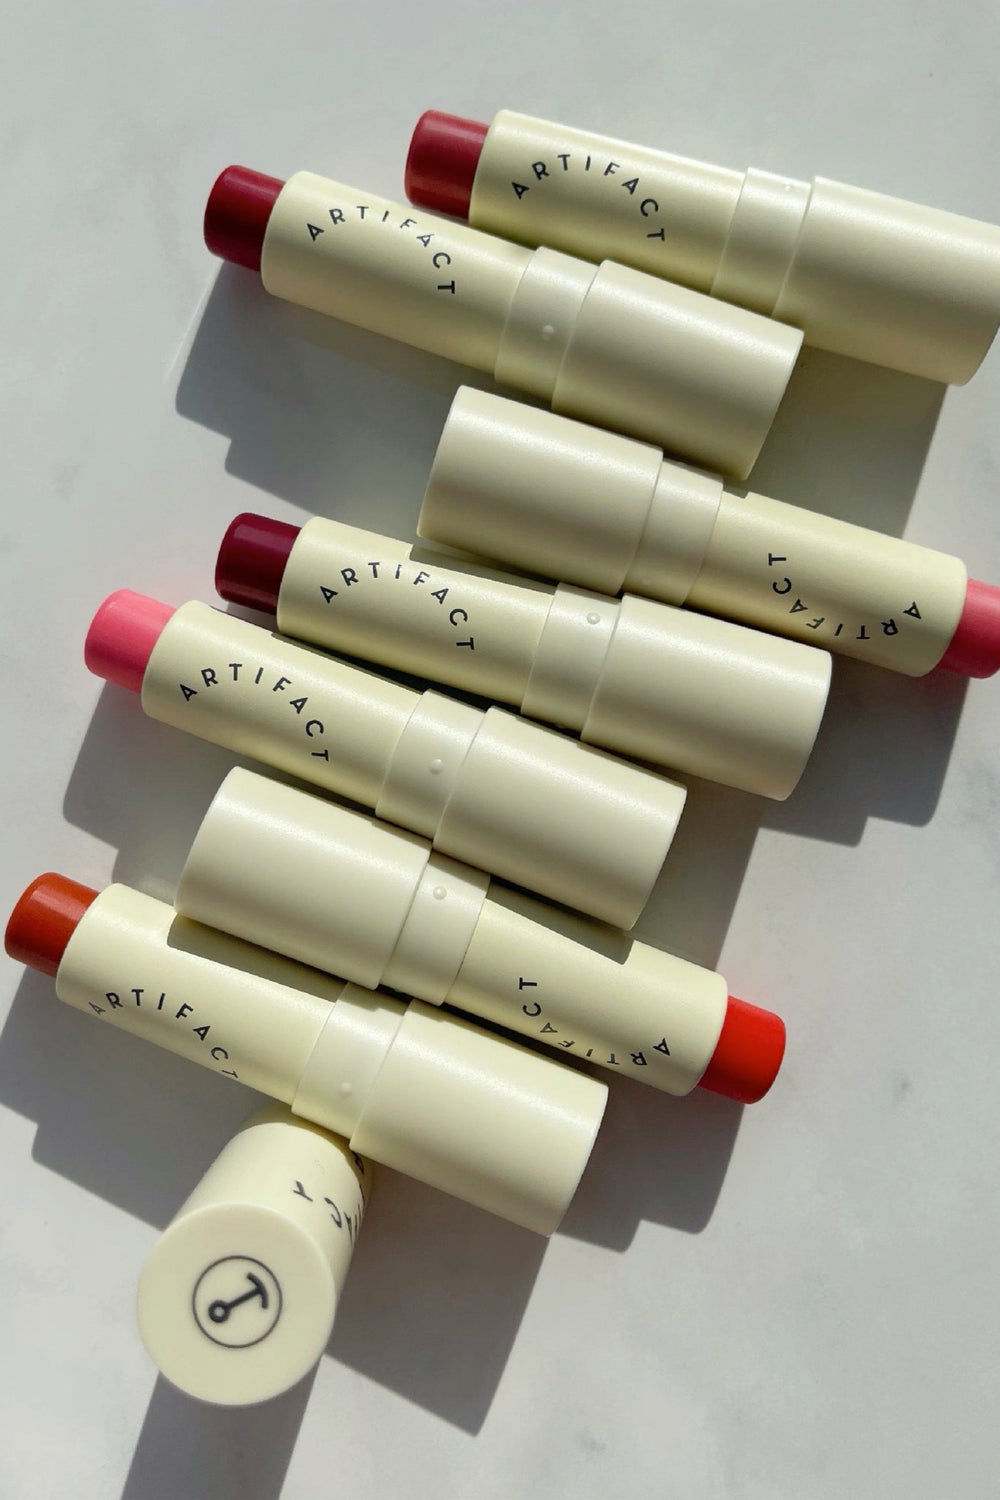 Persimmon's Luck Tinted Lip Balm